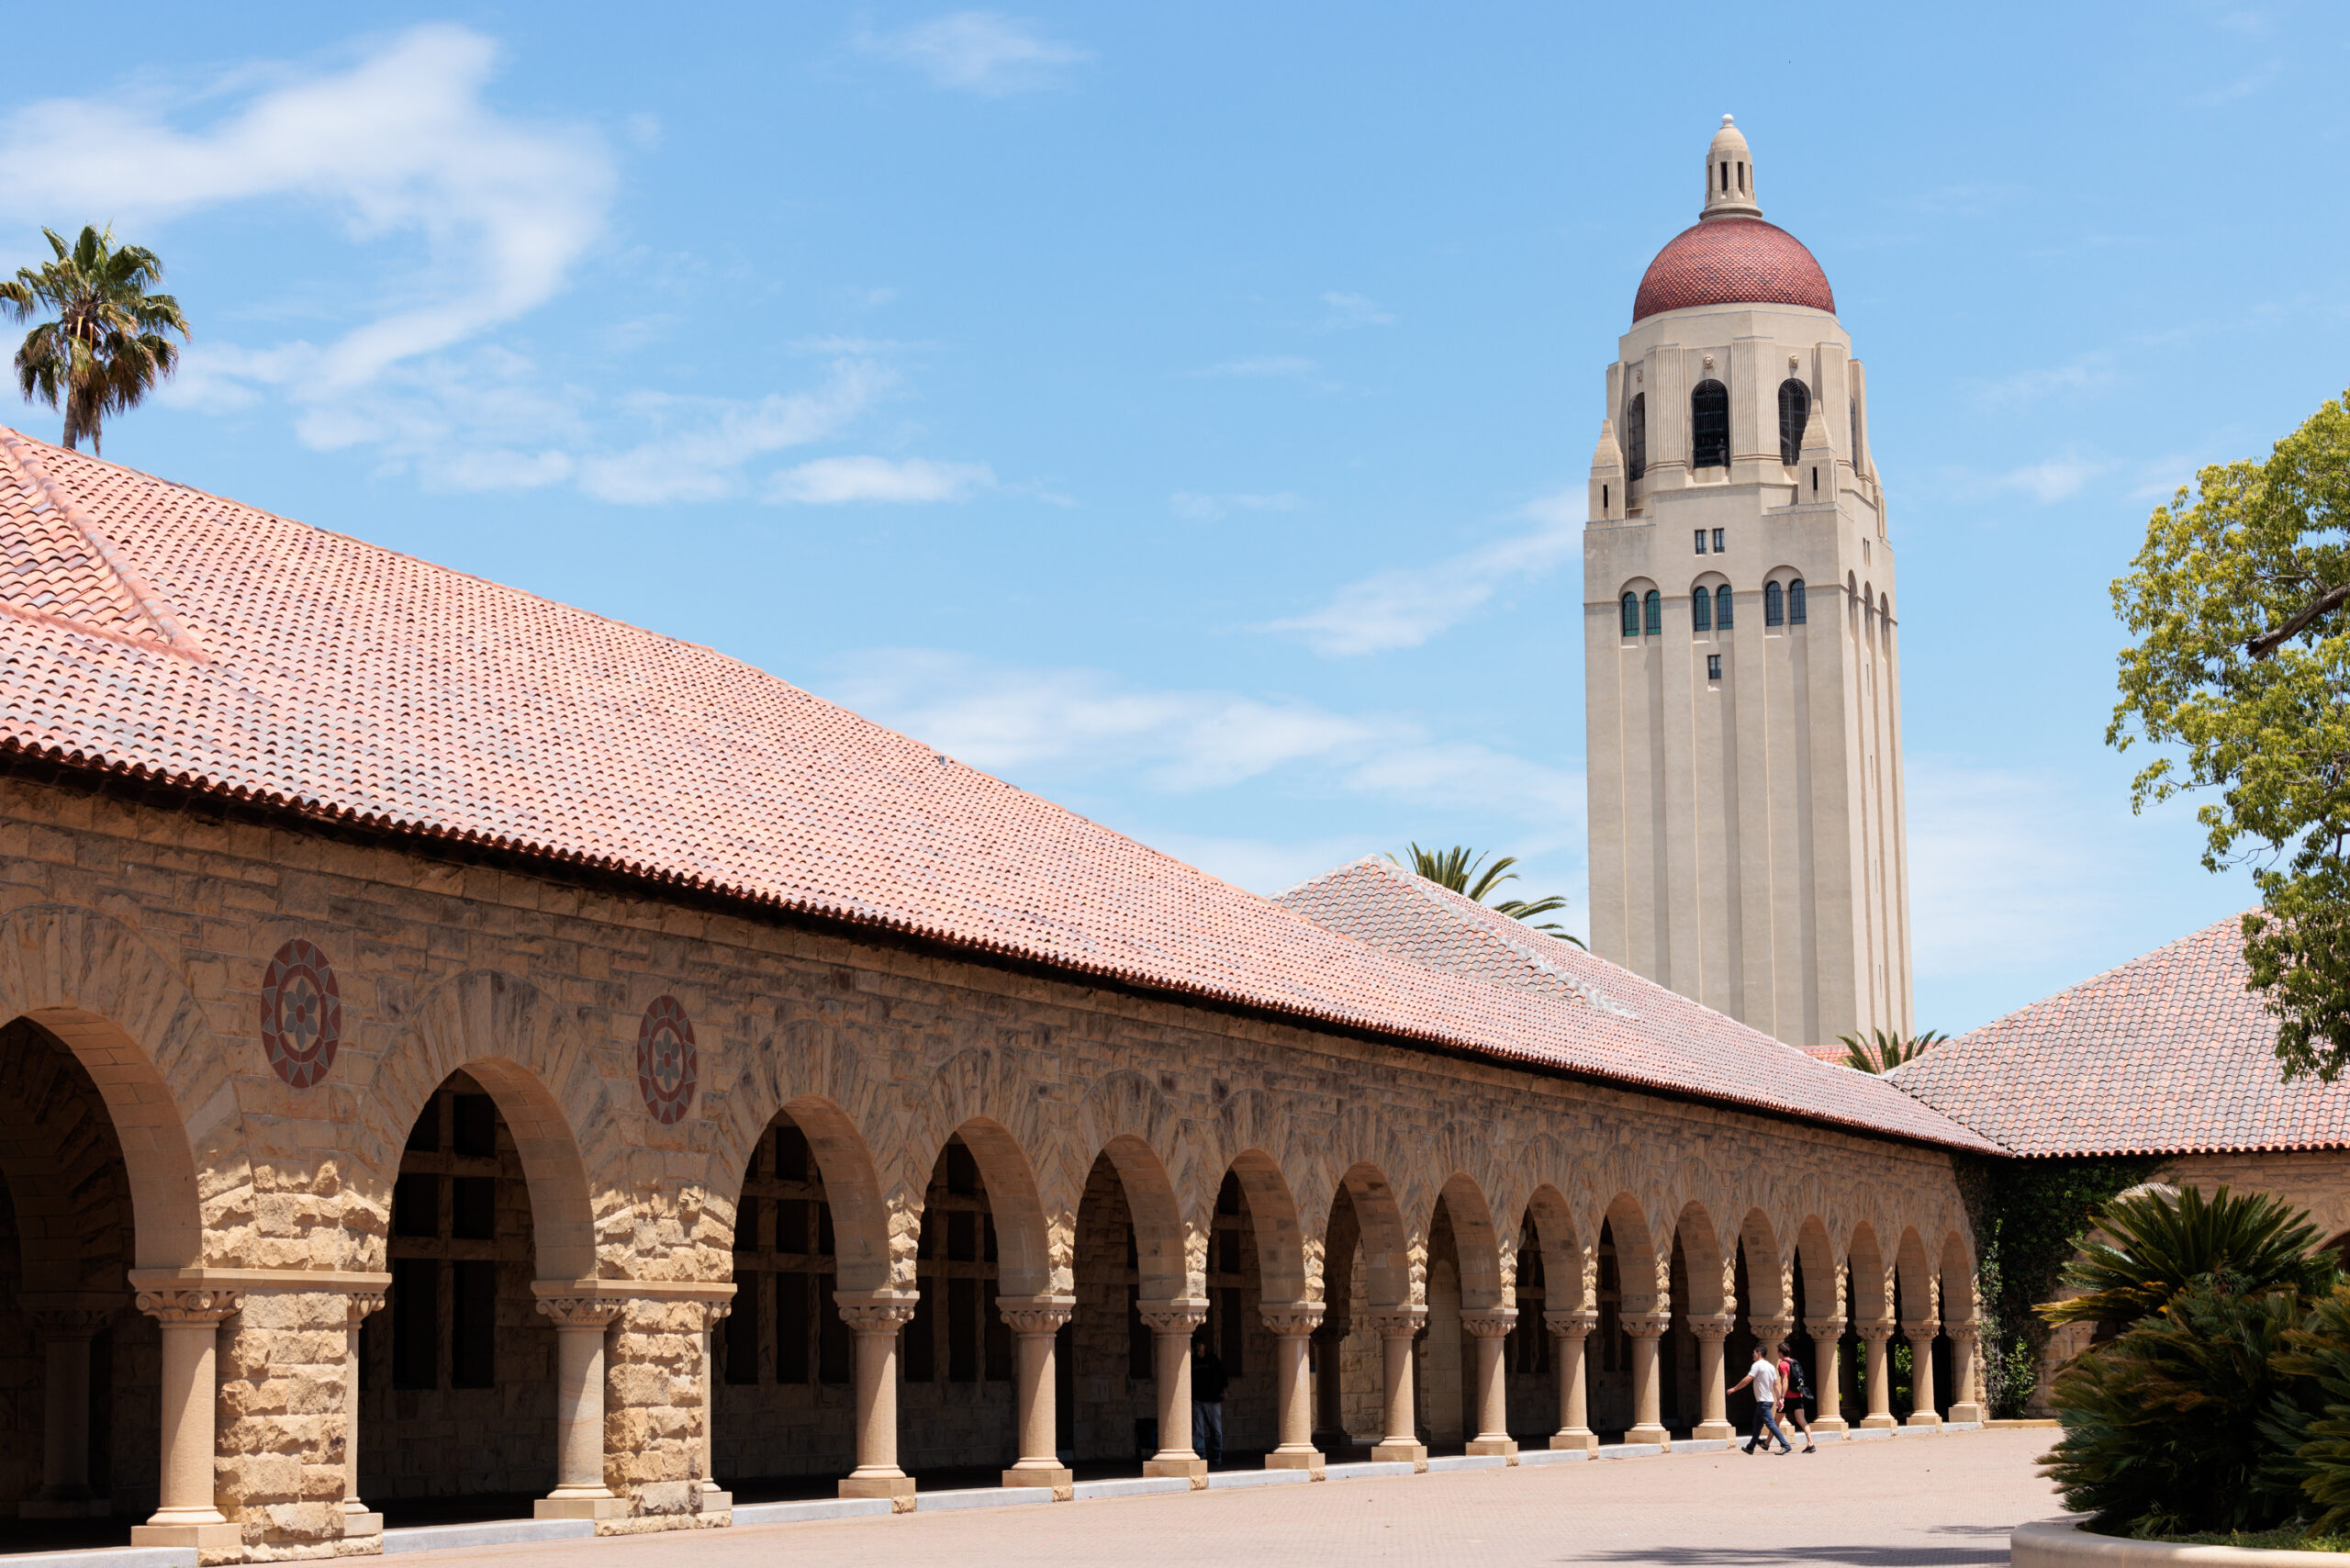 The Hoover Tower is viewed from the Main Quad at Stanford University on a sunny day.